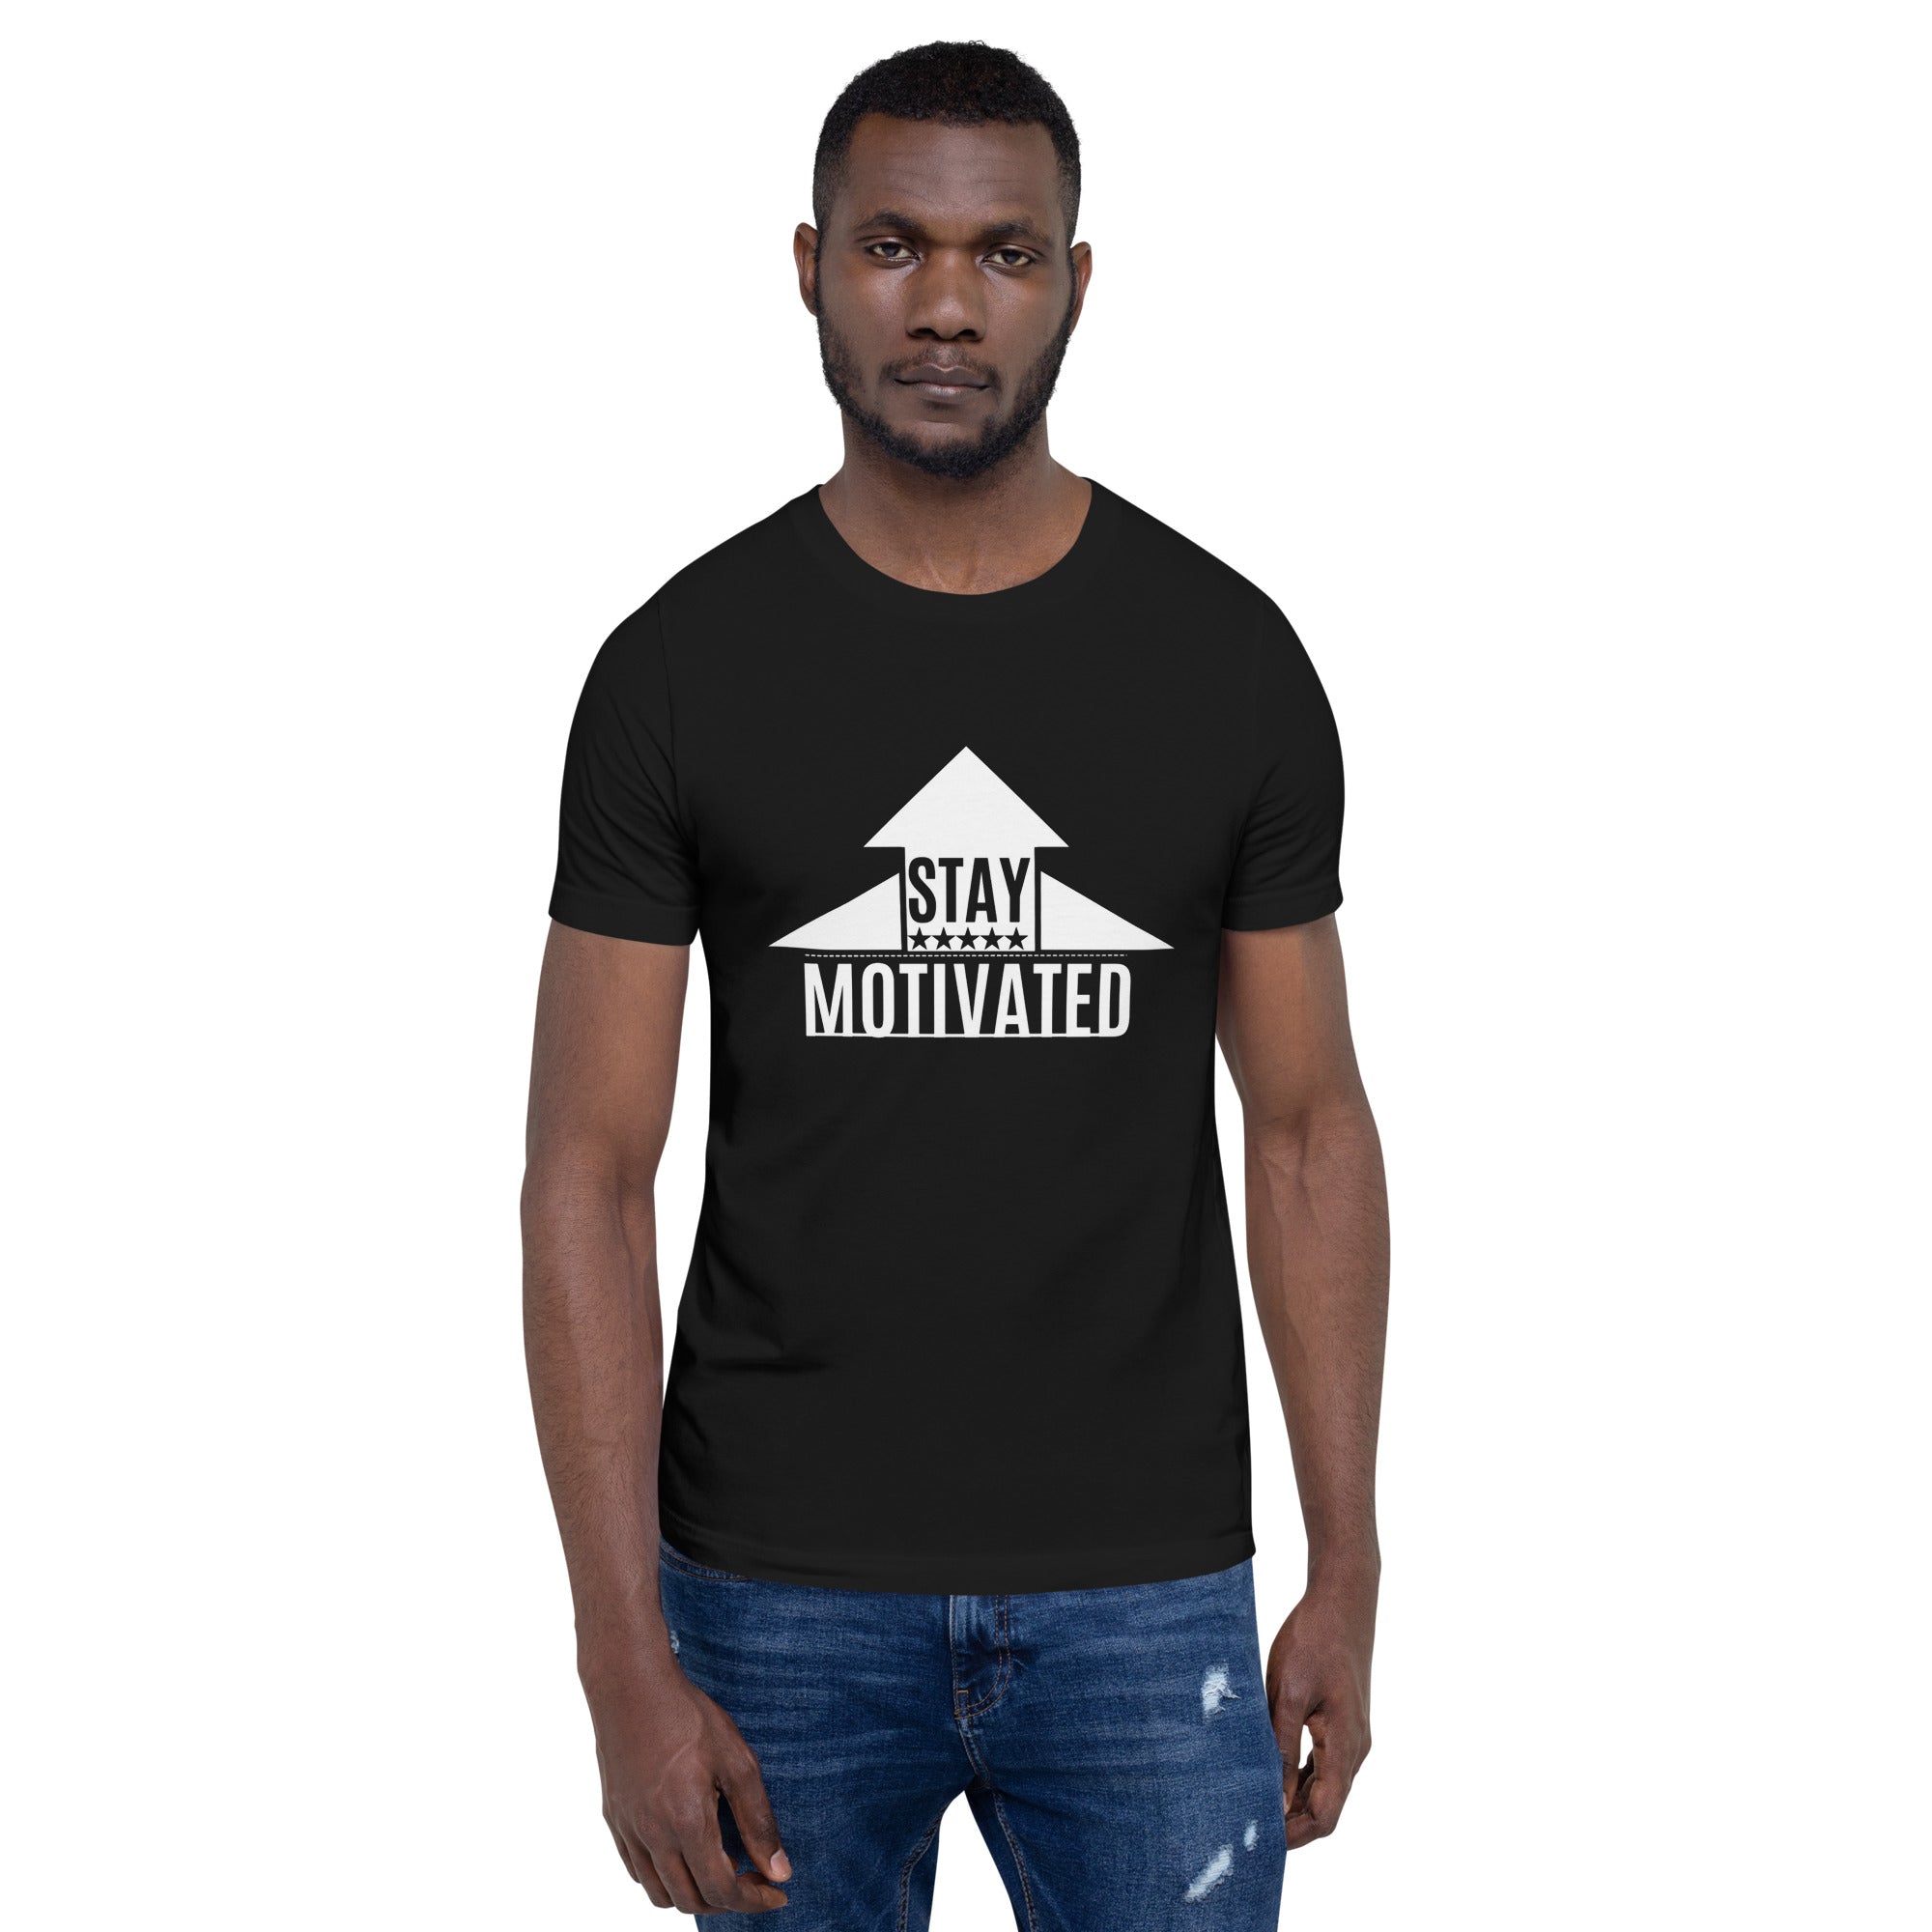 Stay Motivated Unisex T-shirt